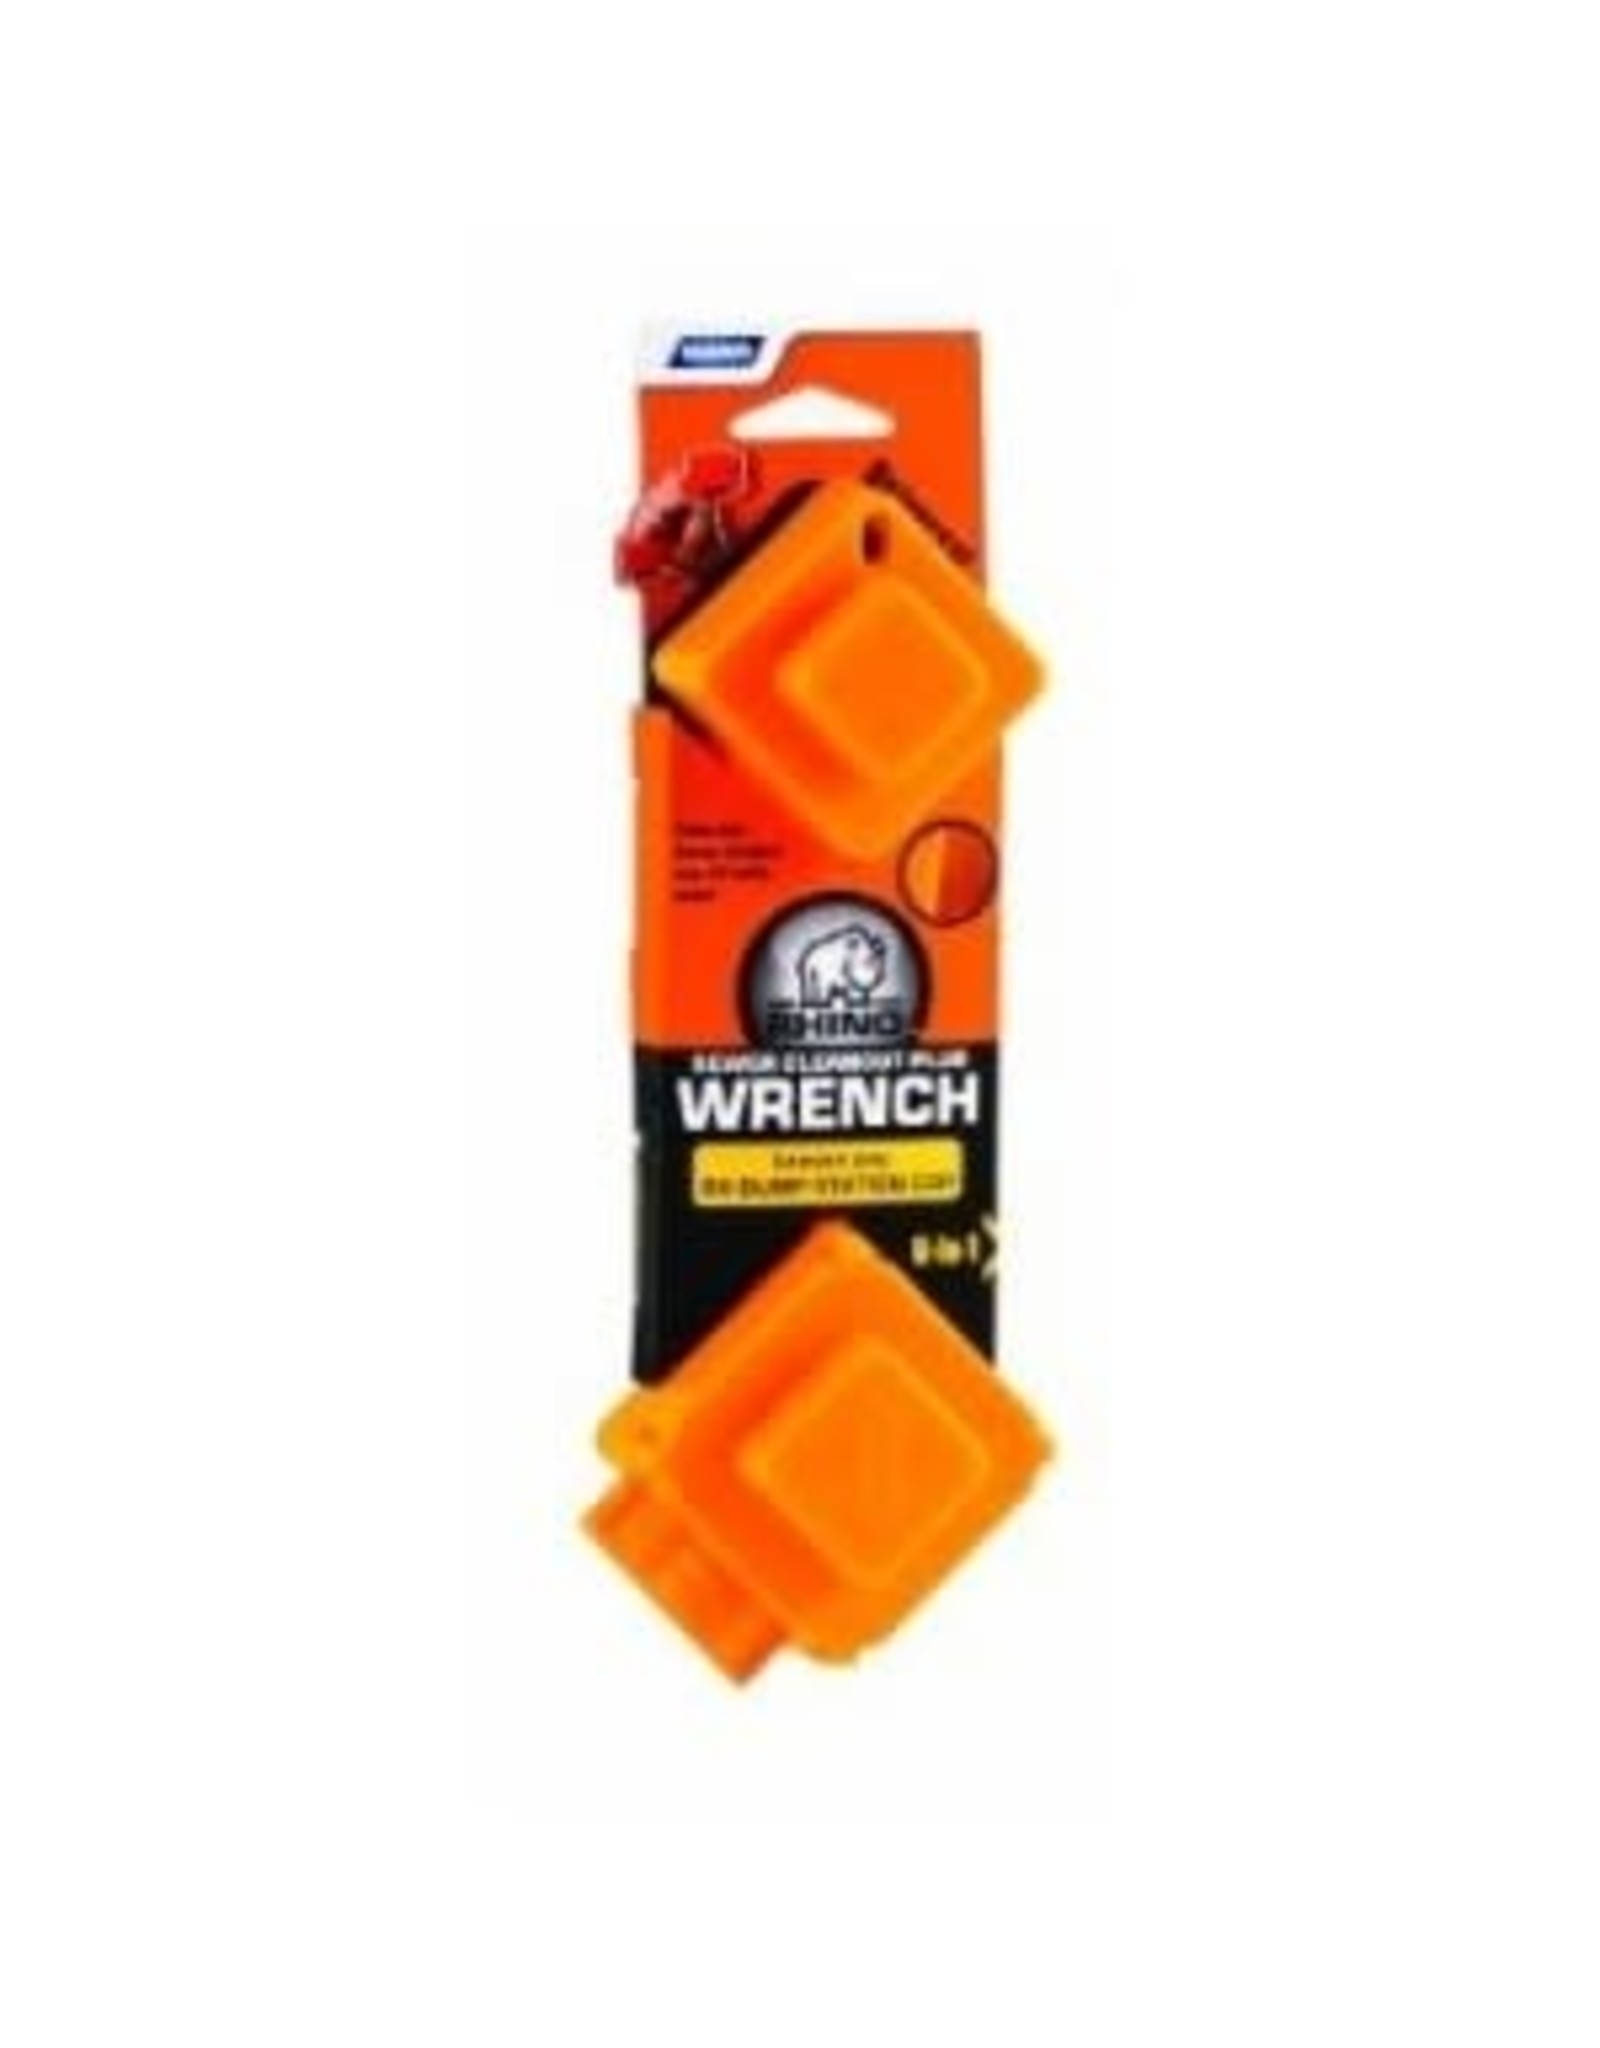 SEWER CLEANOUT WRENCH 39755